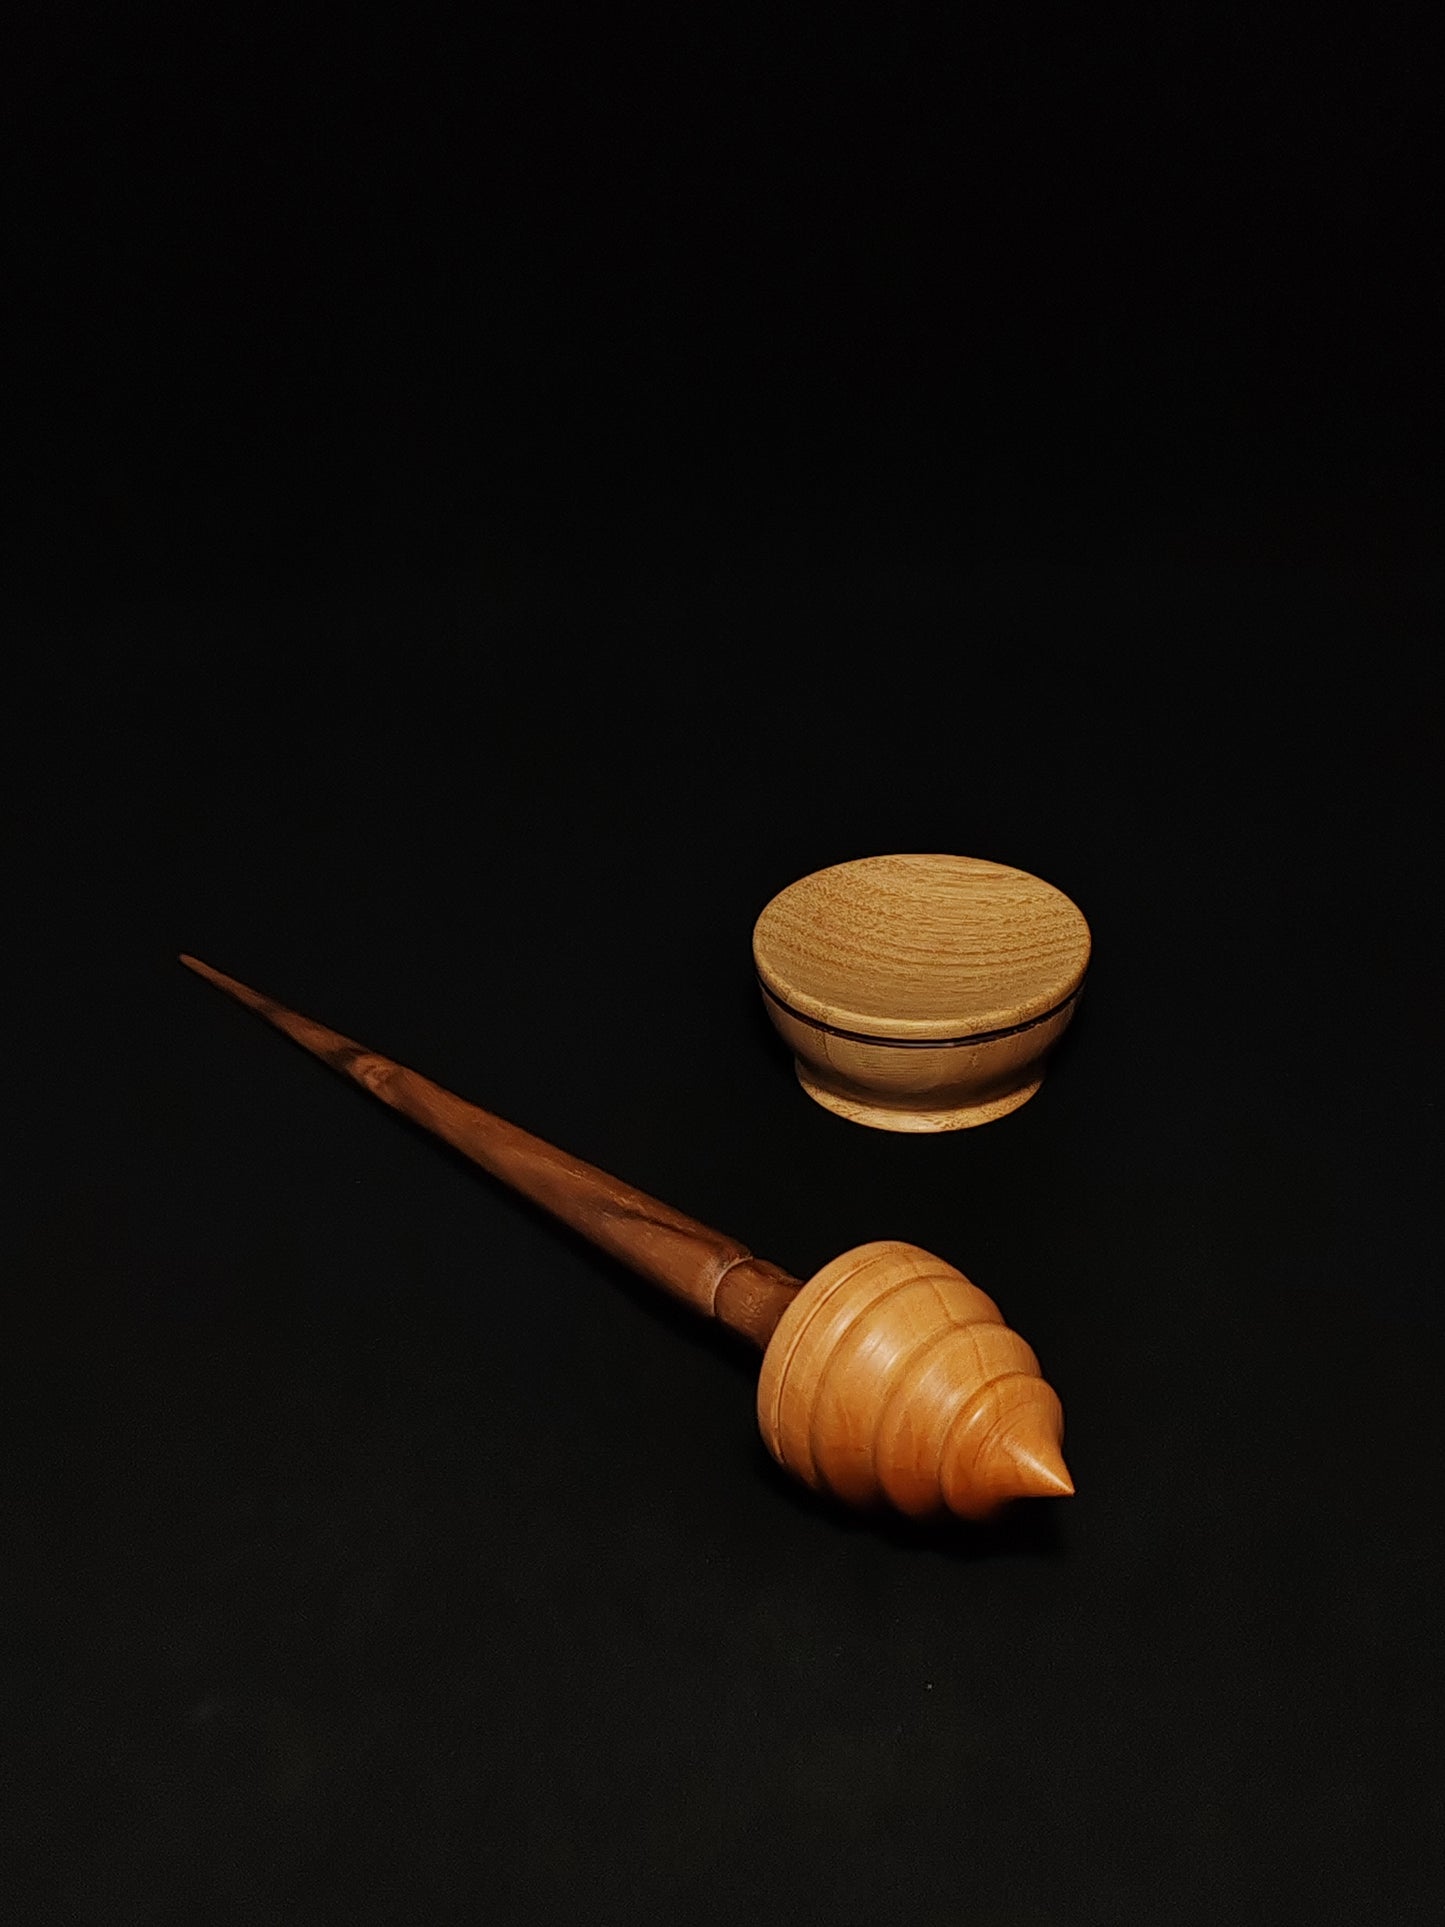 Support Spindle Set: Walnut Shaft & Pear Whorl (24.5 cm / 9.65 inches, 36 g / 1.27 oz) with 5.5 cm / 2.17 inches Oak Support Bowl